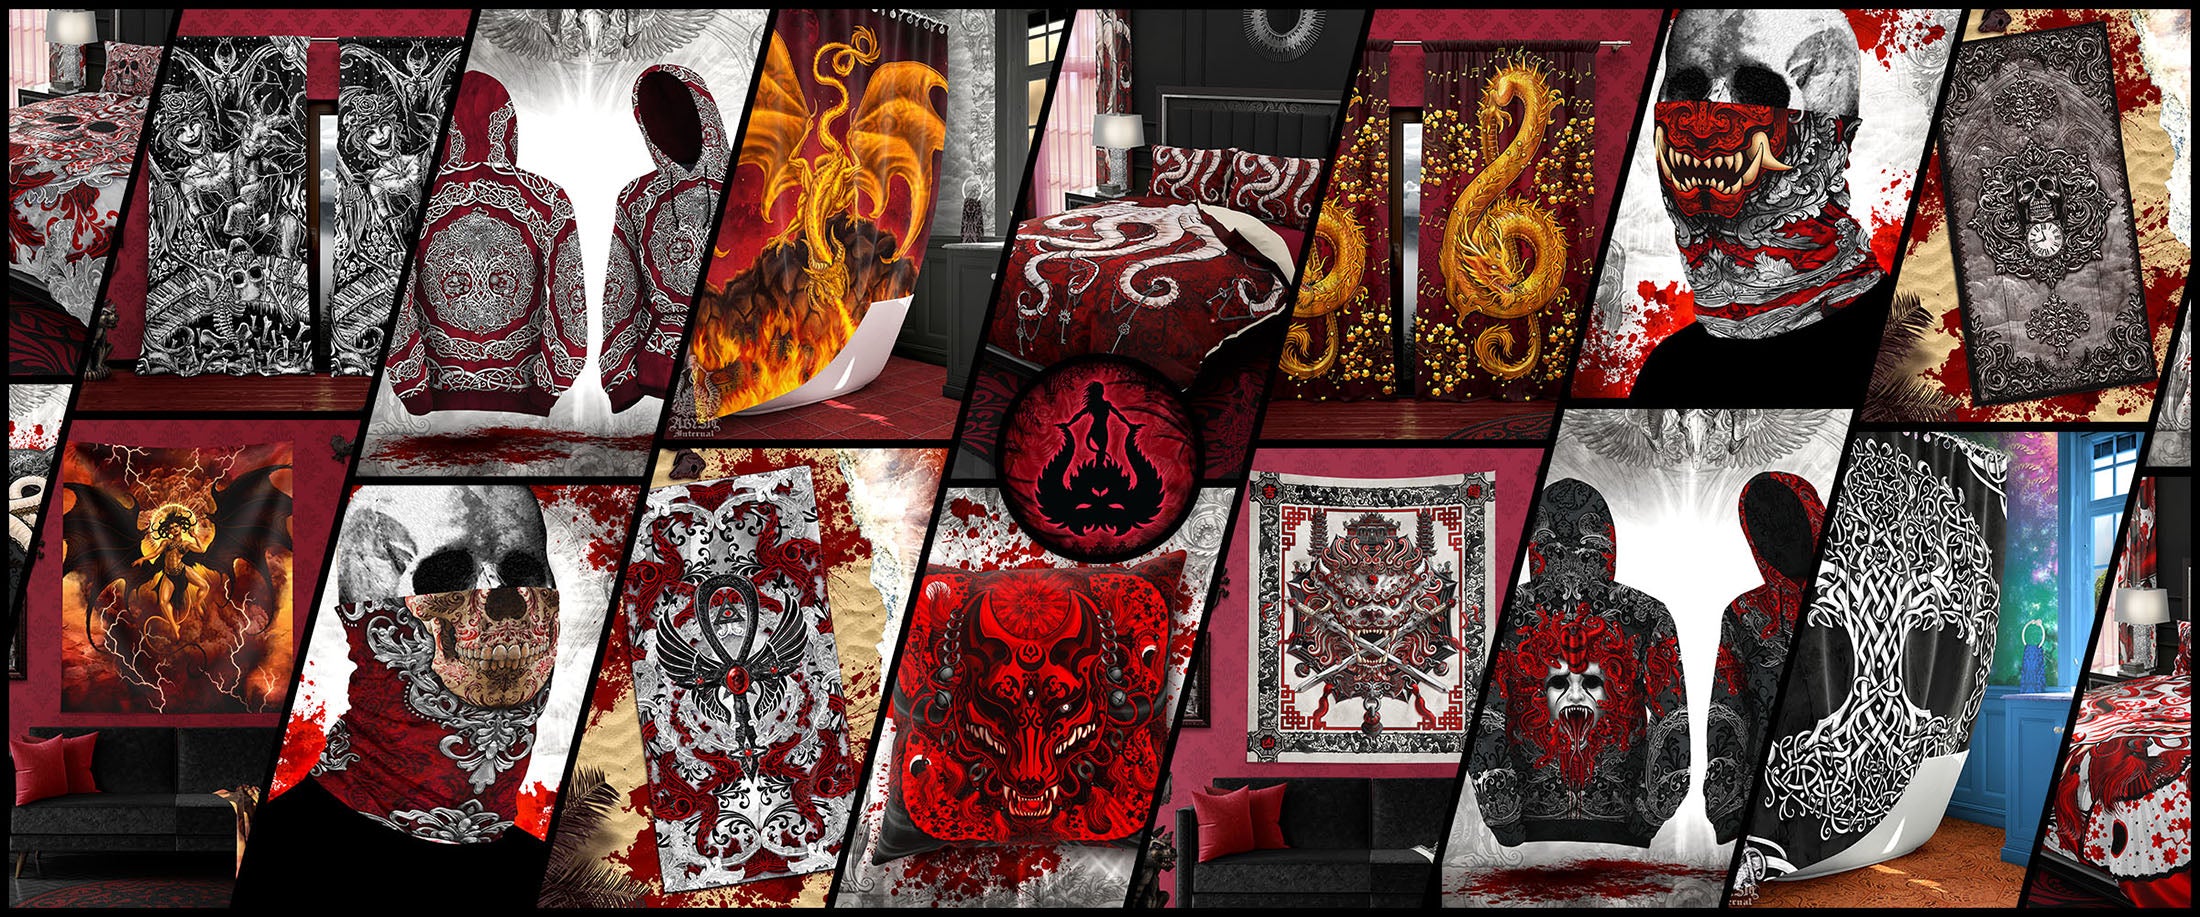 Gothic and Fantasy Art Prints and home decor by Abysm Internal, Curtains, Bedding Sets, Hoodies, Kimonos, Tapestries, blankets. With Demons, Dragons, Medusa, Kitsune, Skulls and other monsters